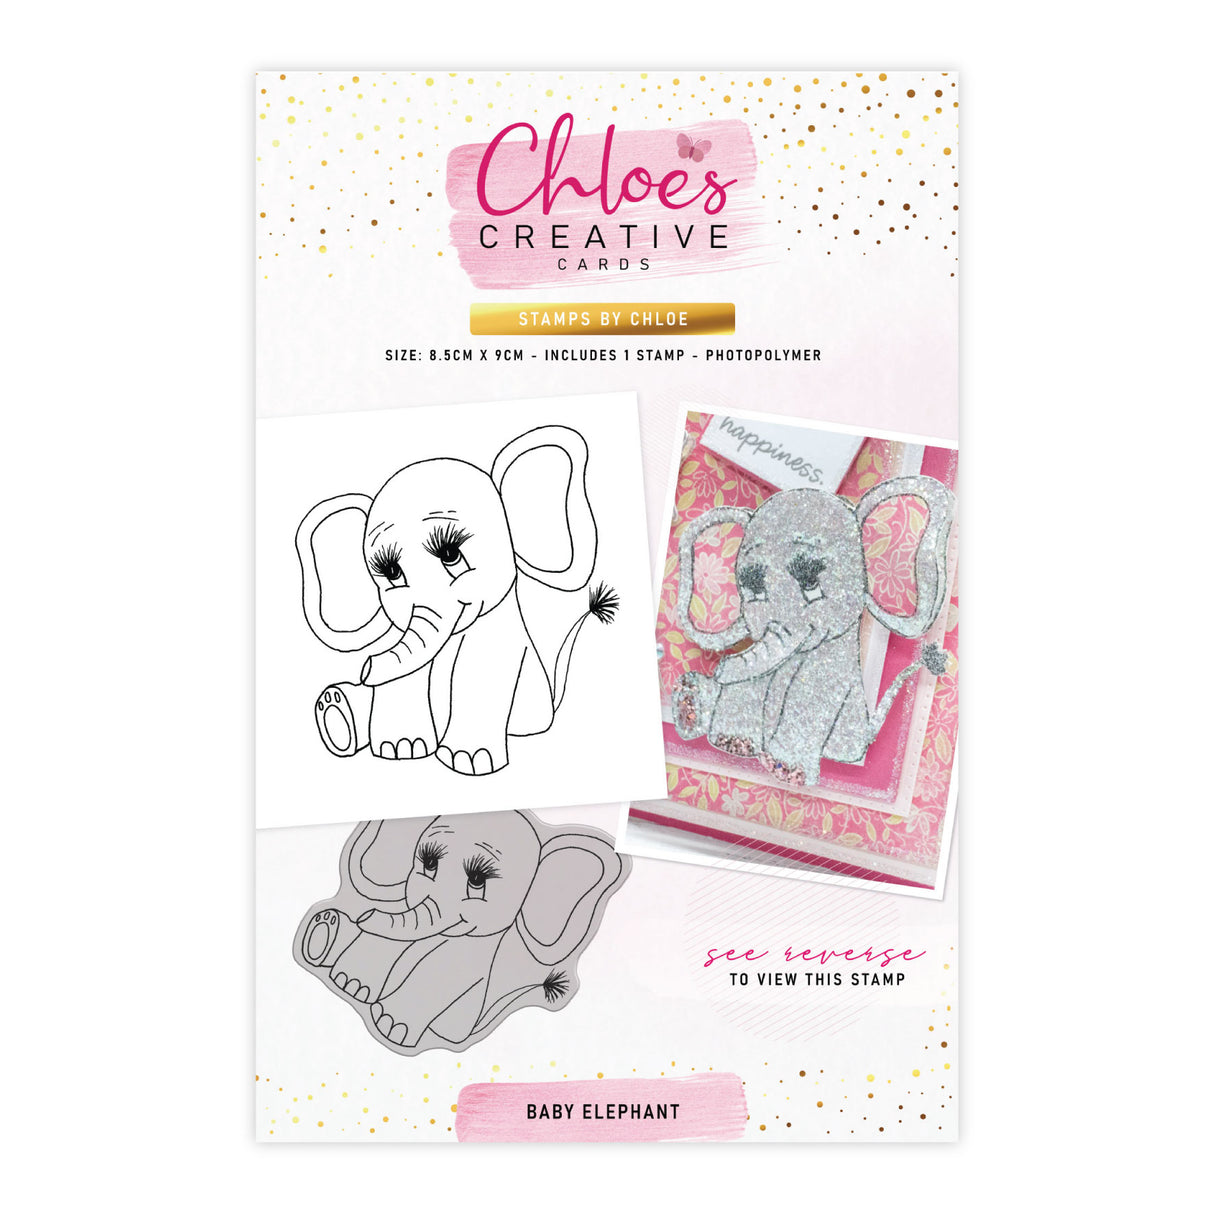 Chloes Creative Cards Photopolymer Stamp Set (A6) -  Baby Elephant